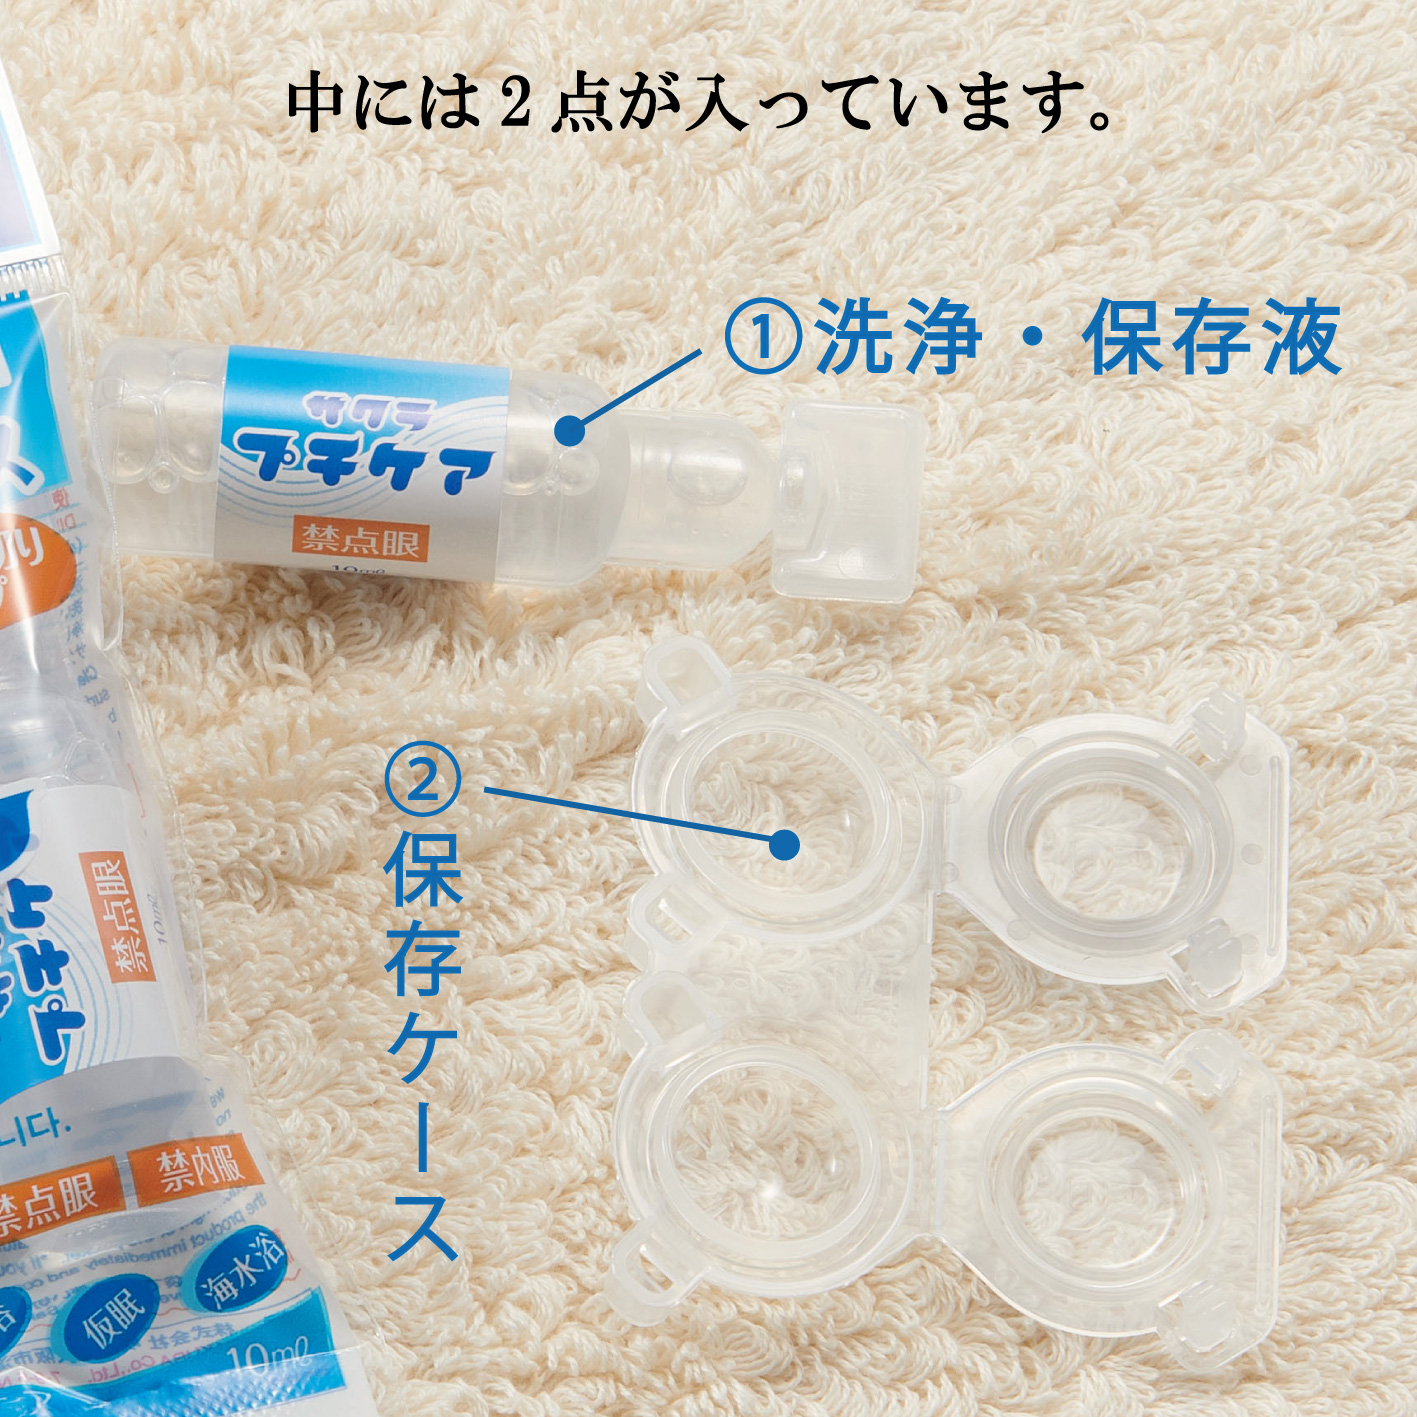 [ regular handling shop ] contact lens washing fluid stock solution + case 1 times using cut .ta Ipsa kla small care 10 piece set travel disposable disaster prevention goods 